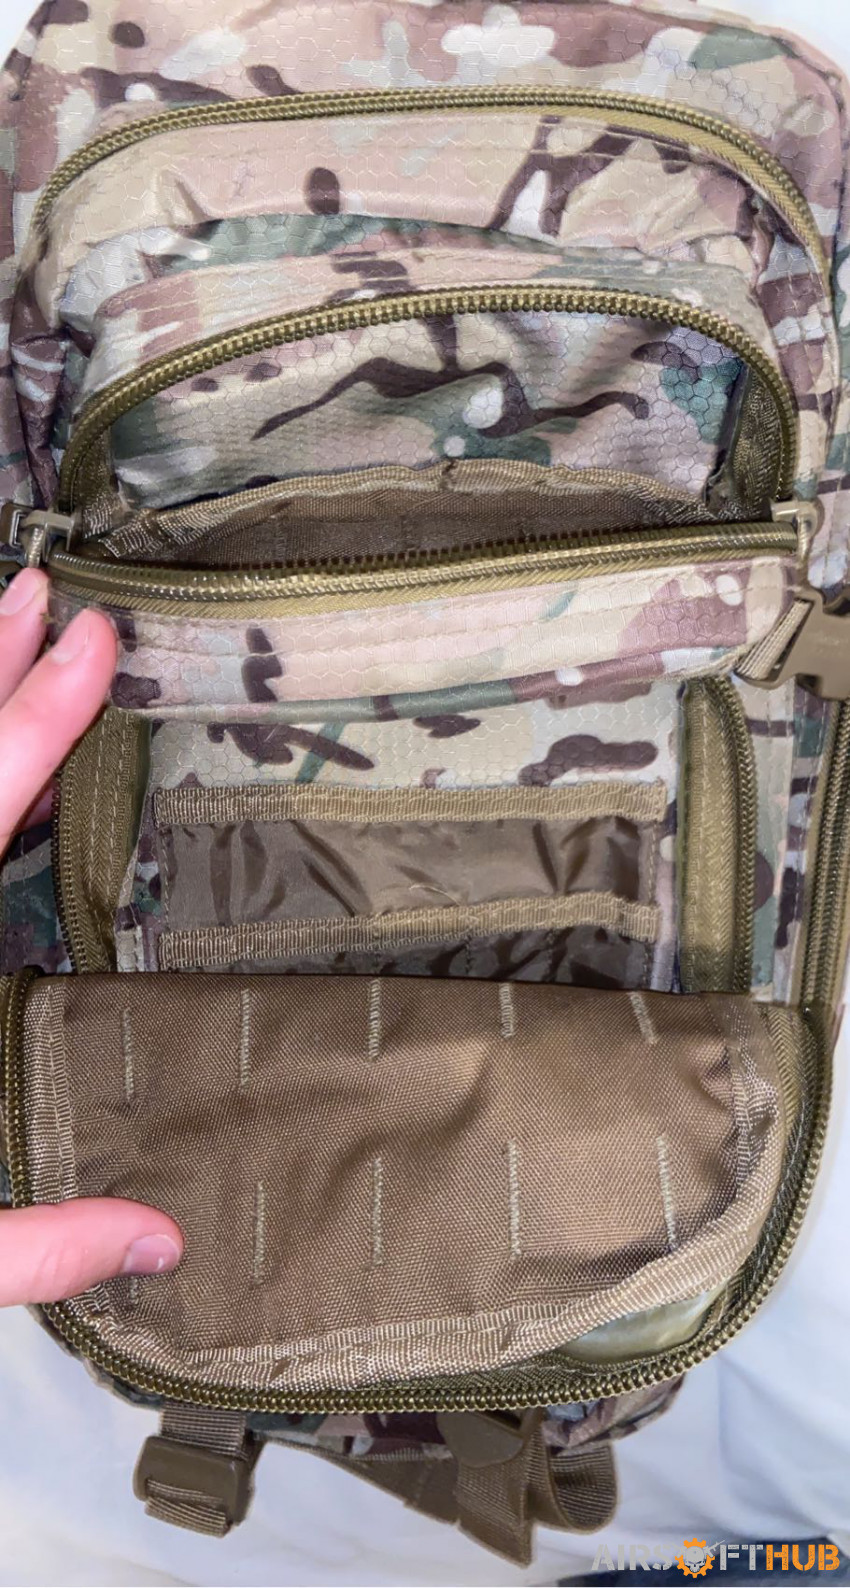 Kombat tactical day sack - Used airsoft equipment